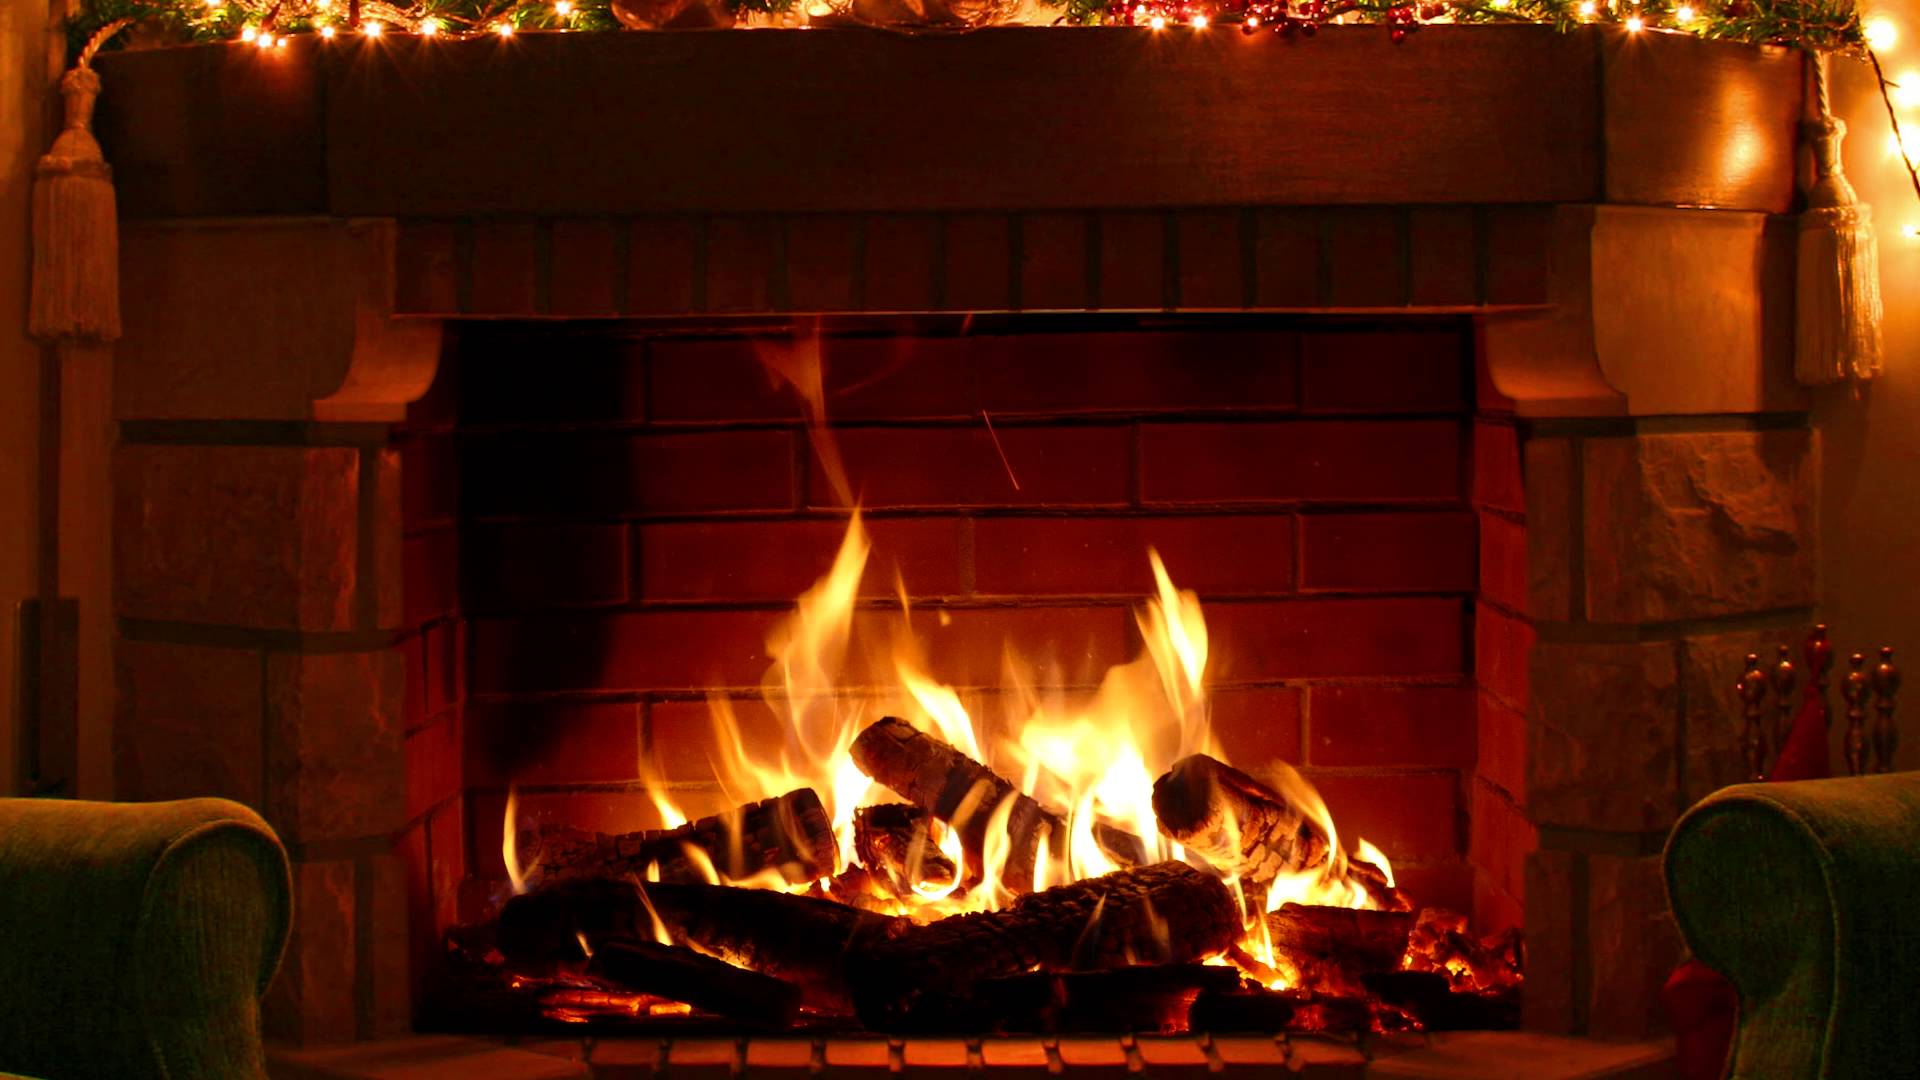 Fireplaces Wallpapers - Wallpaper Cave